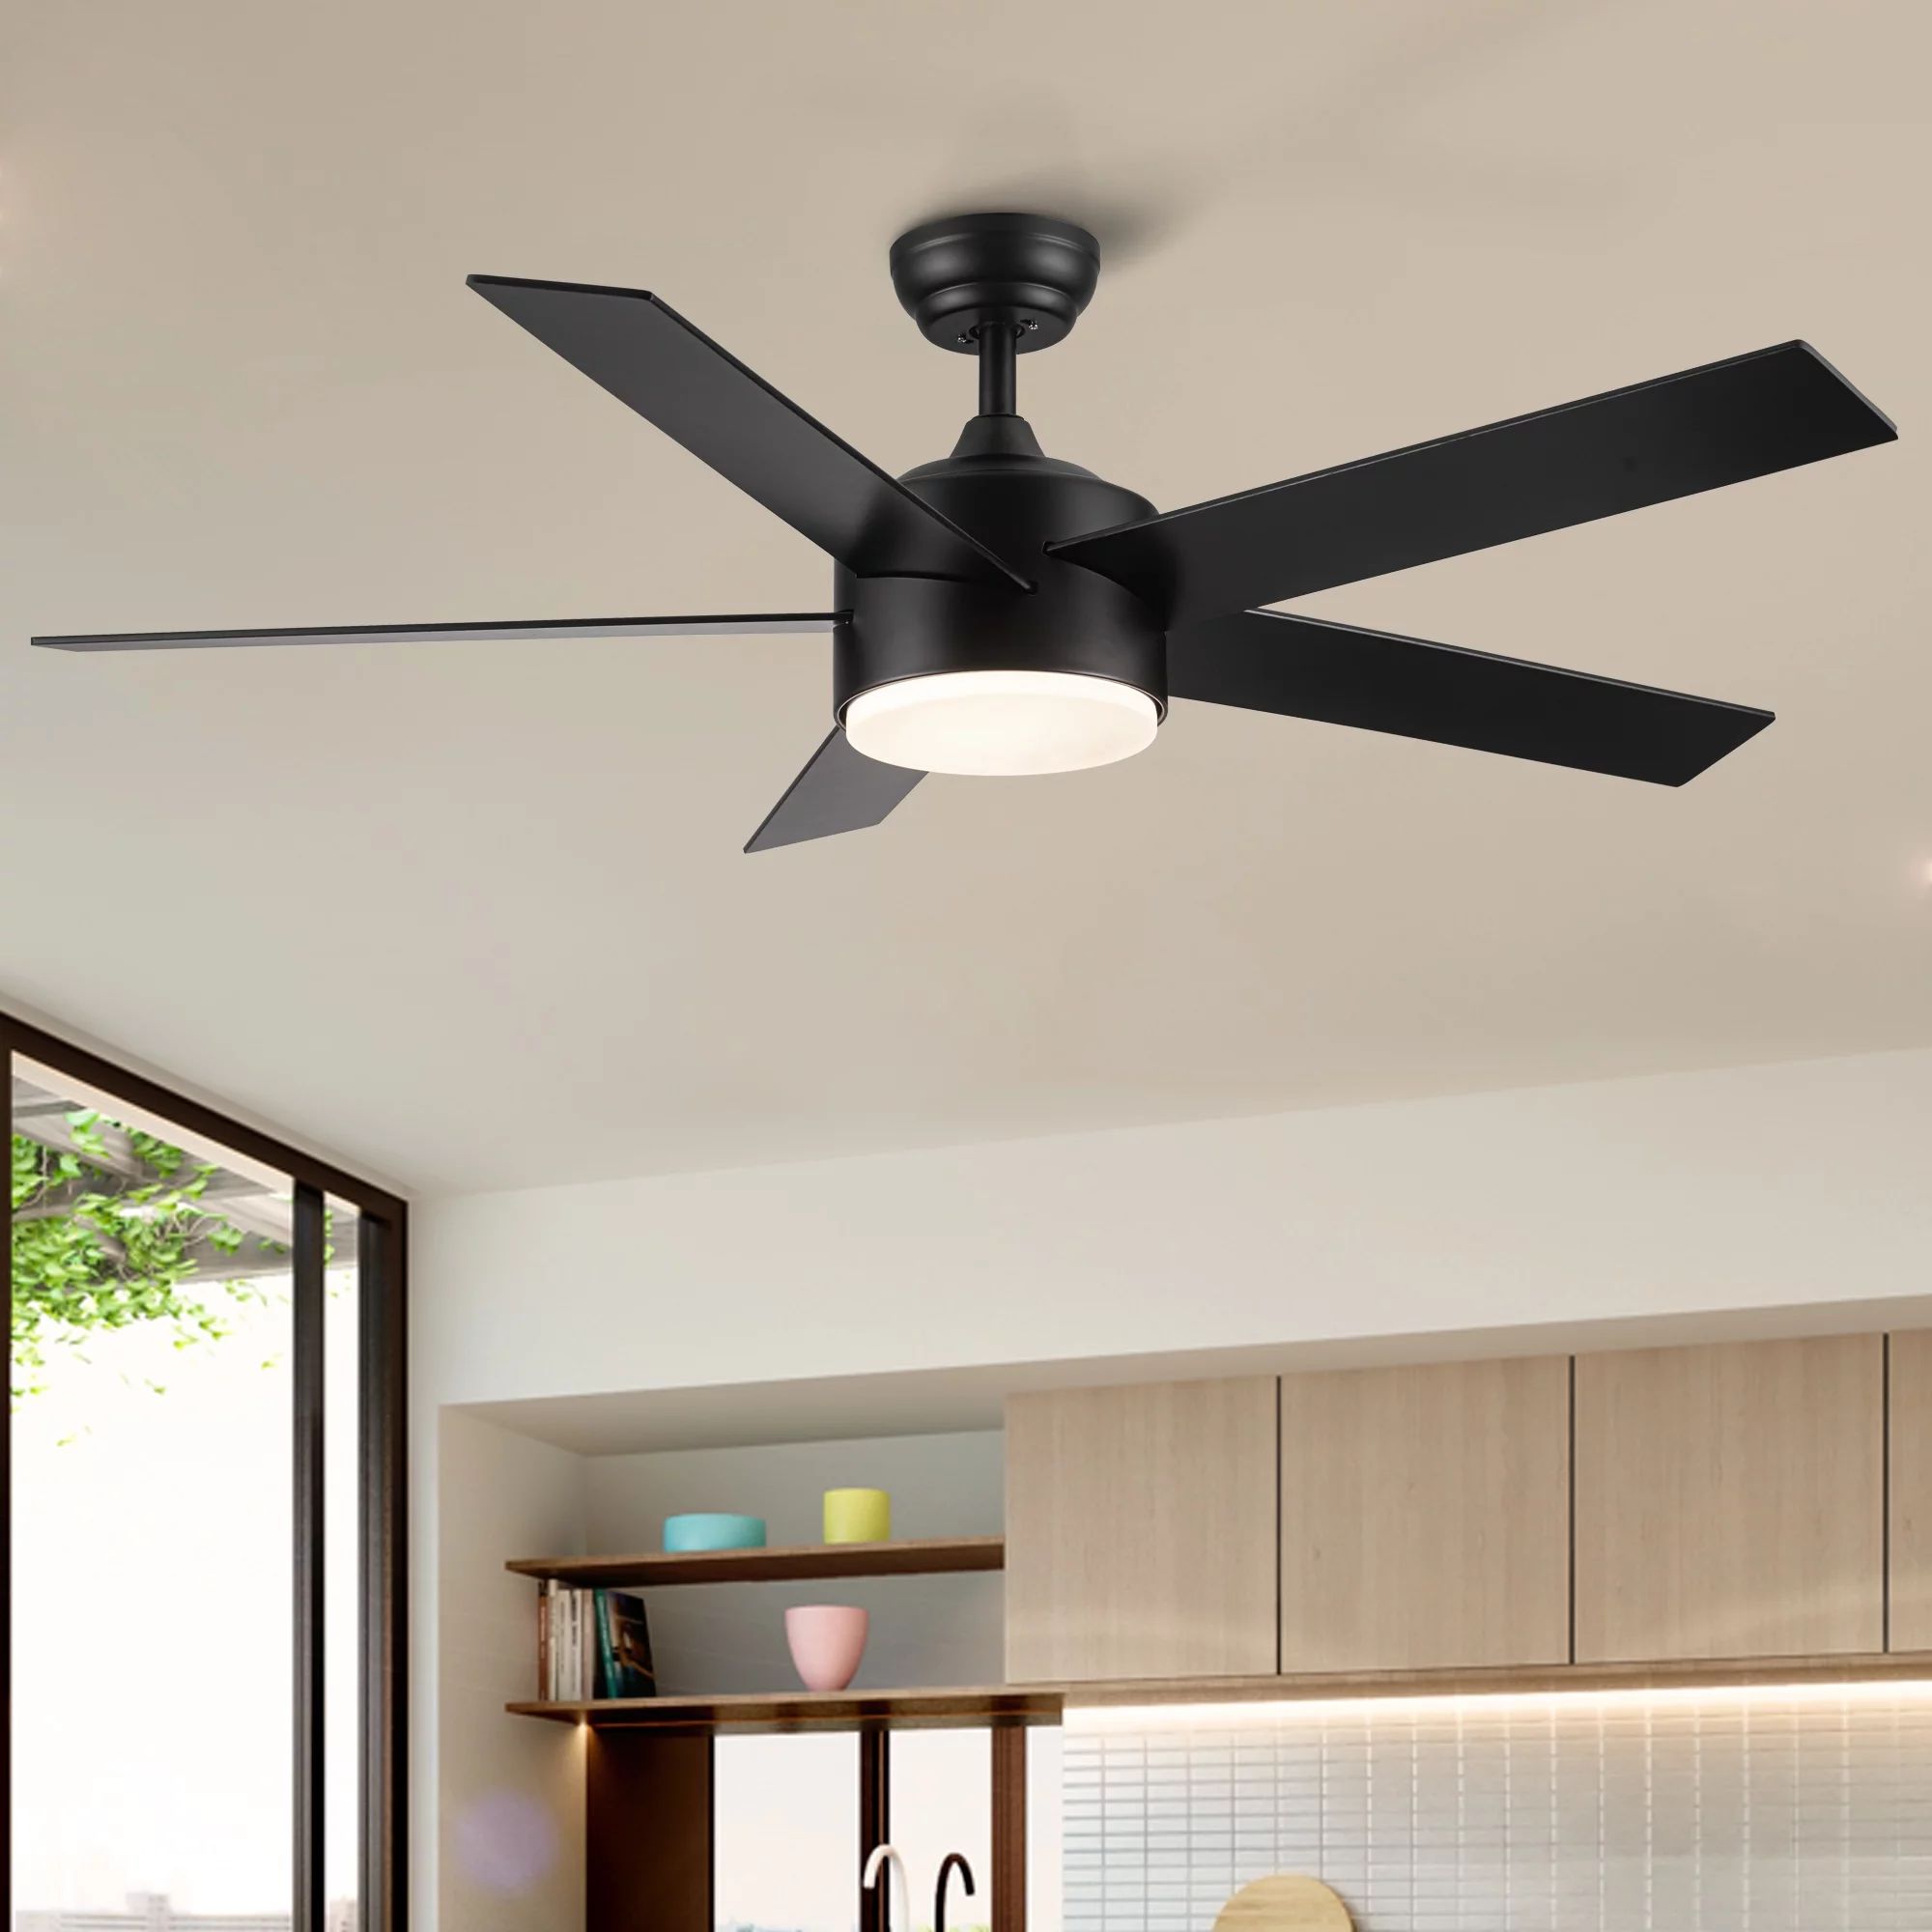 CQSXDA 52" Integrated LED Light Matte Black Blade Ceiling Fan with Remote Control | Walmart (US)